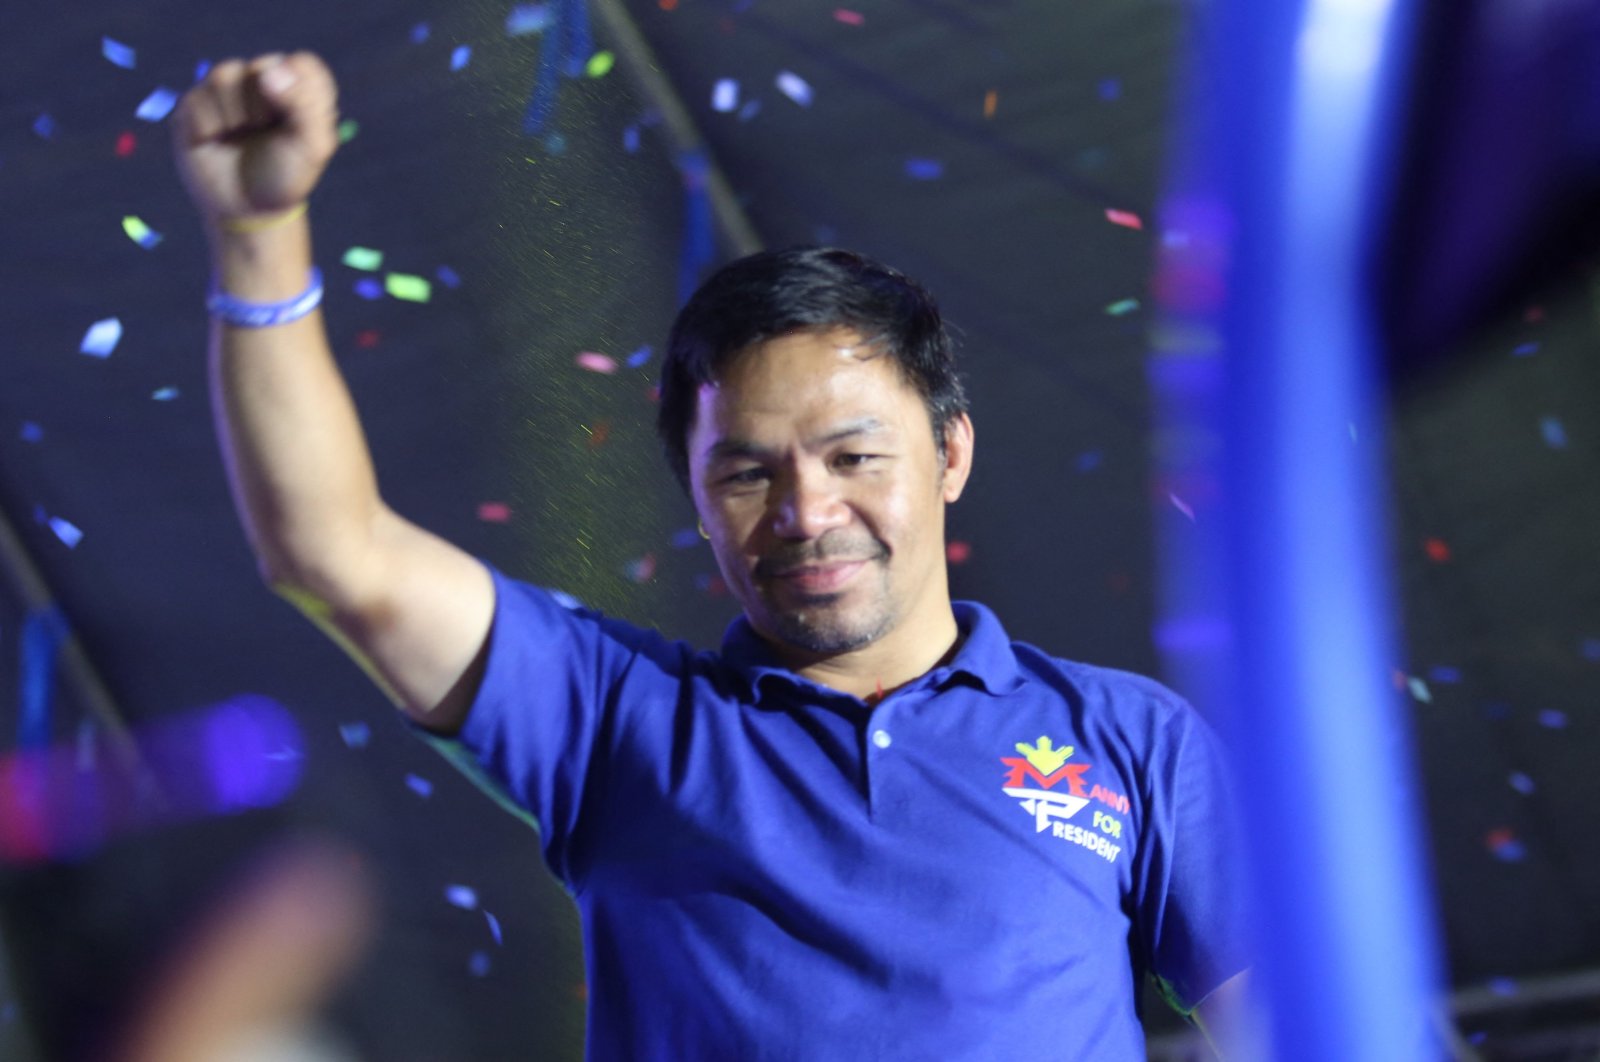 Philippine boxing icon and presidential candidate Manny Pacquiao during a campaign rally, General Santos City, Mindanao, May 7, 2022. (AFP Photo)